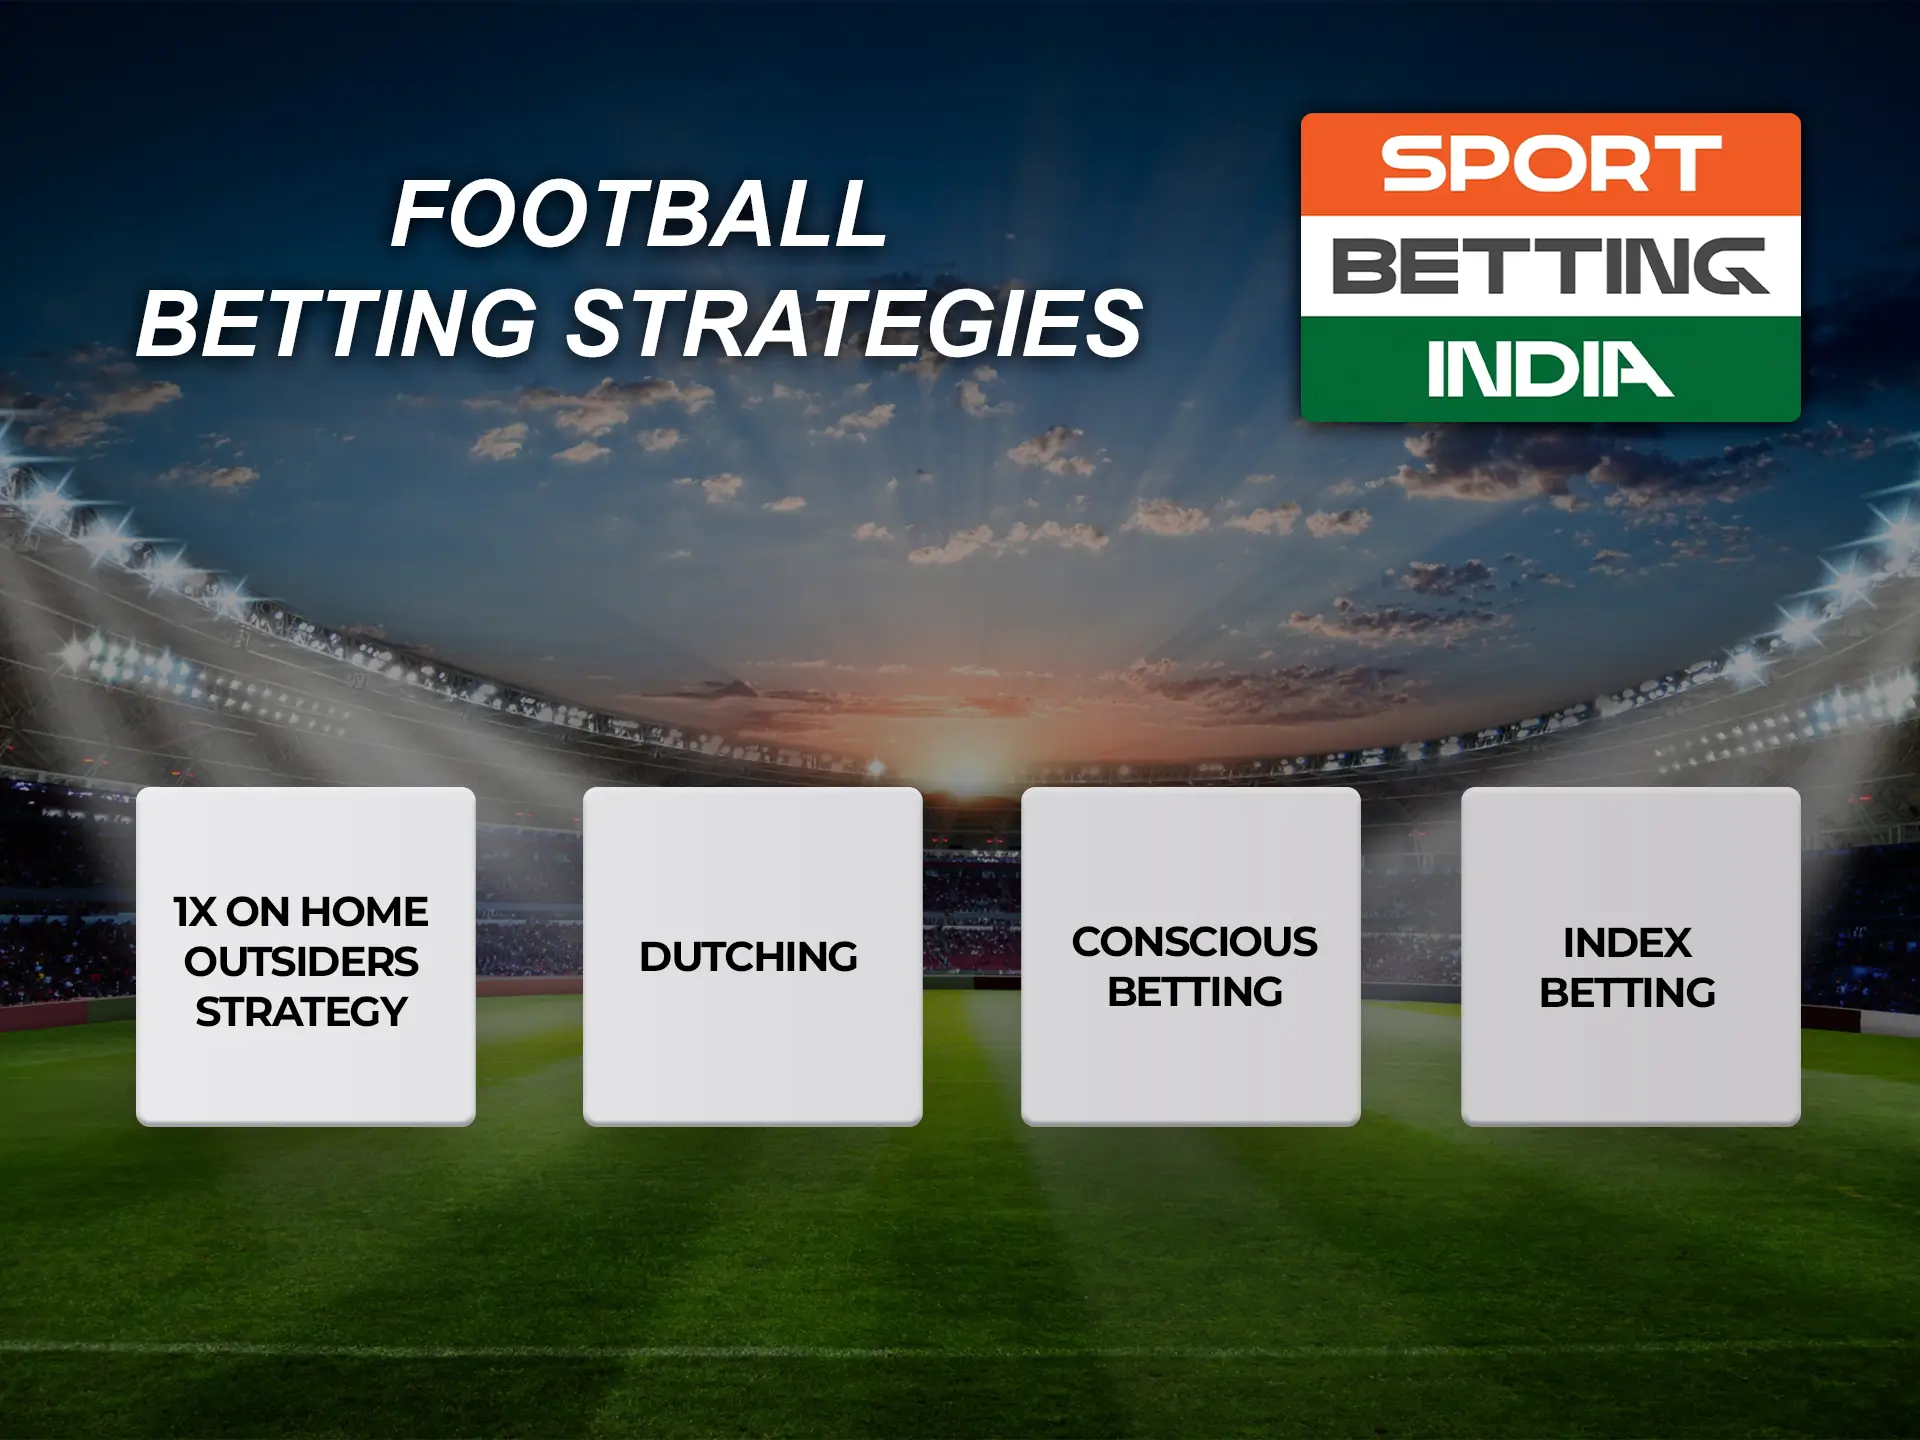 Follow football news and make predictions using the right betting strategies.